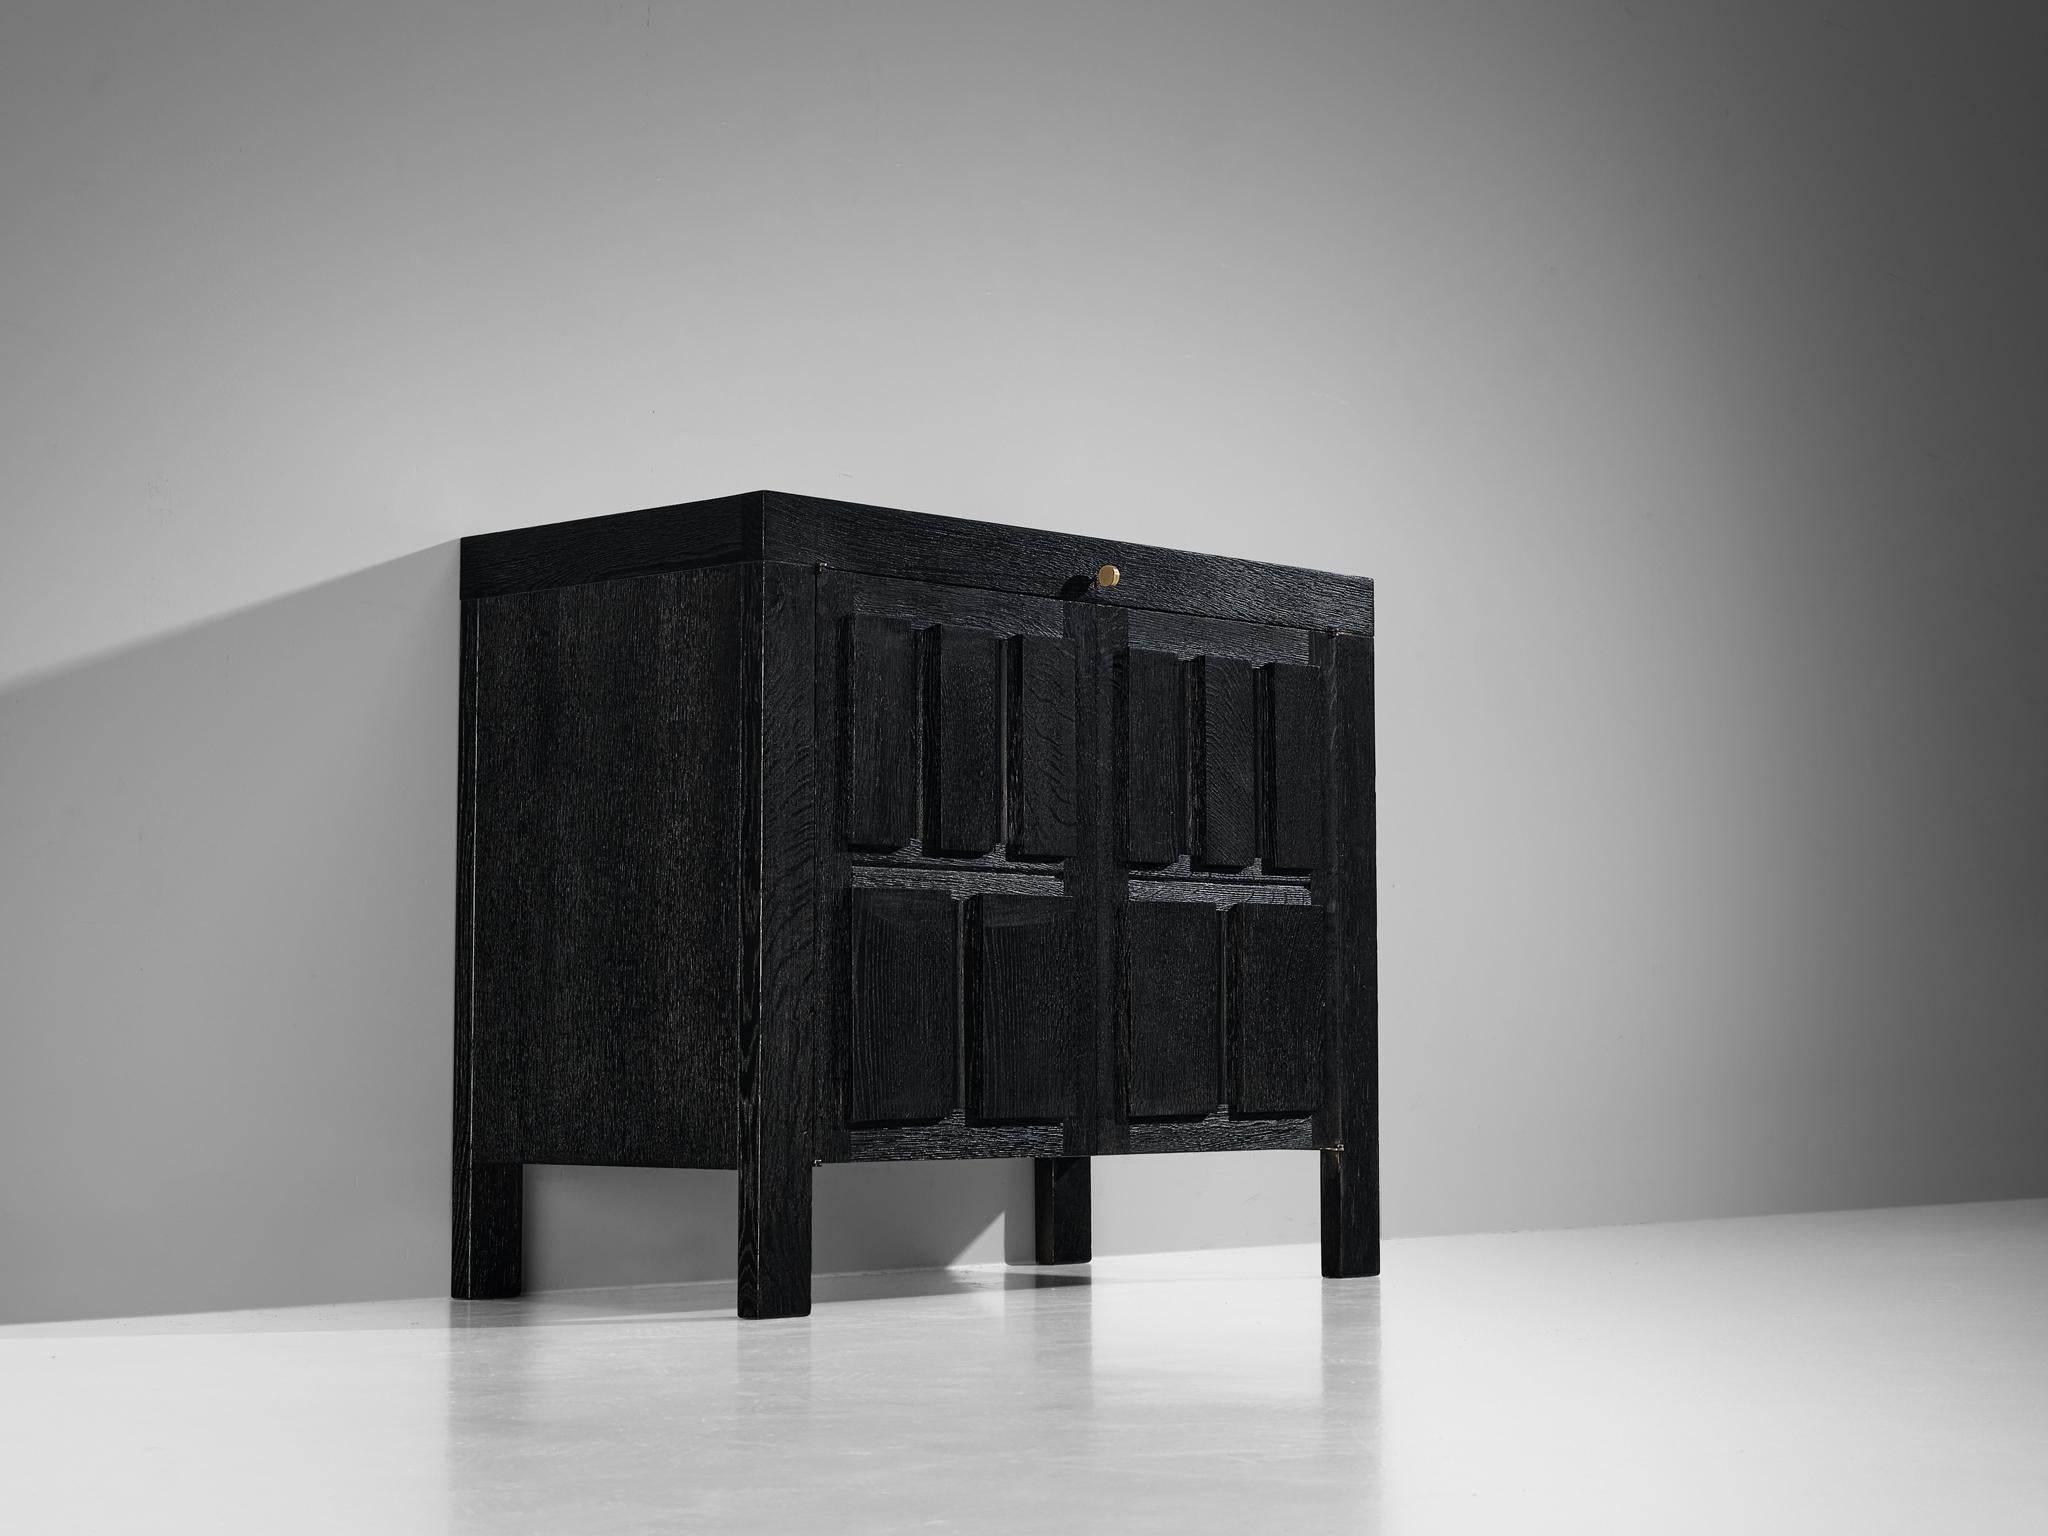 Cabinet, lacquered oak, brass, Belgium, 1970s

This Belgian sideboard features a clear rhythm and flow established by means of a well thought through lay out that is utterly well-balanced. The carved geometrical shapes on the door panels immediately